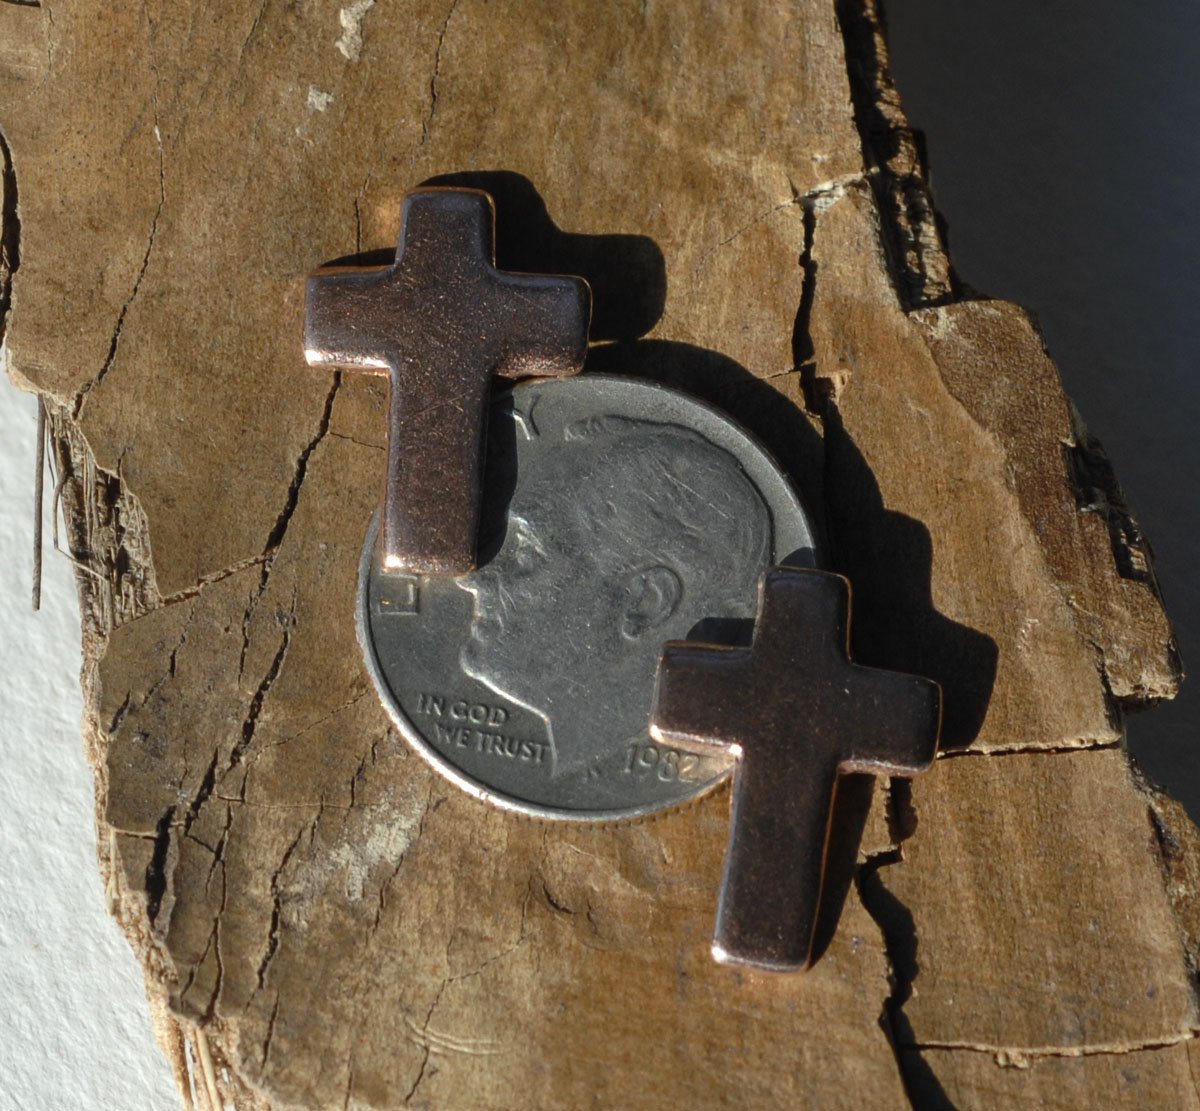 Cross 11mmx15mm Religious, Metal Blanks Cutout for Enameling Stamping Soldering - Variety of Metals  6 pieces